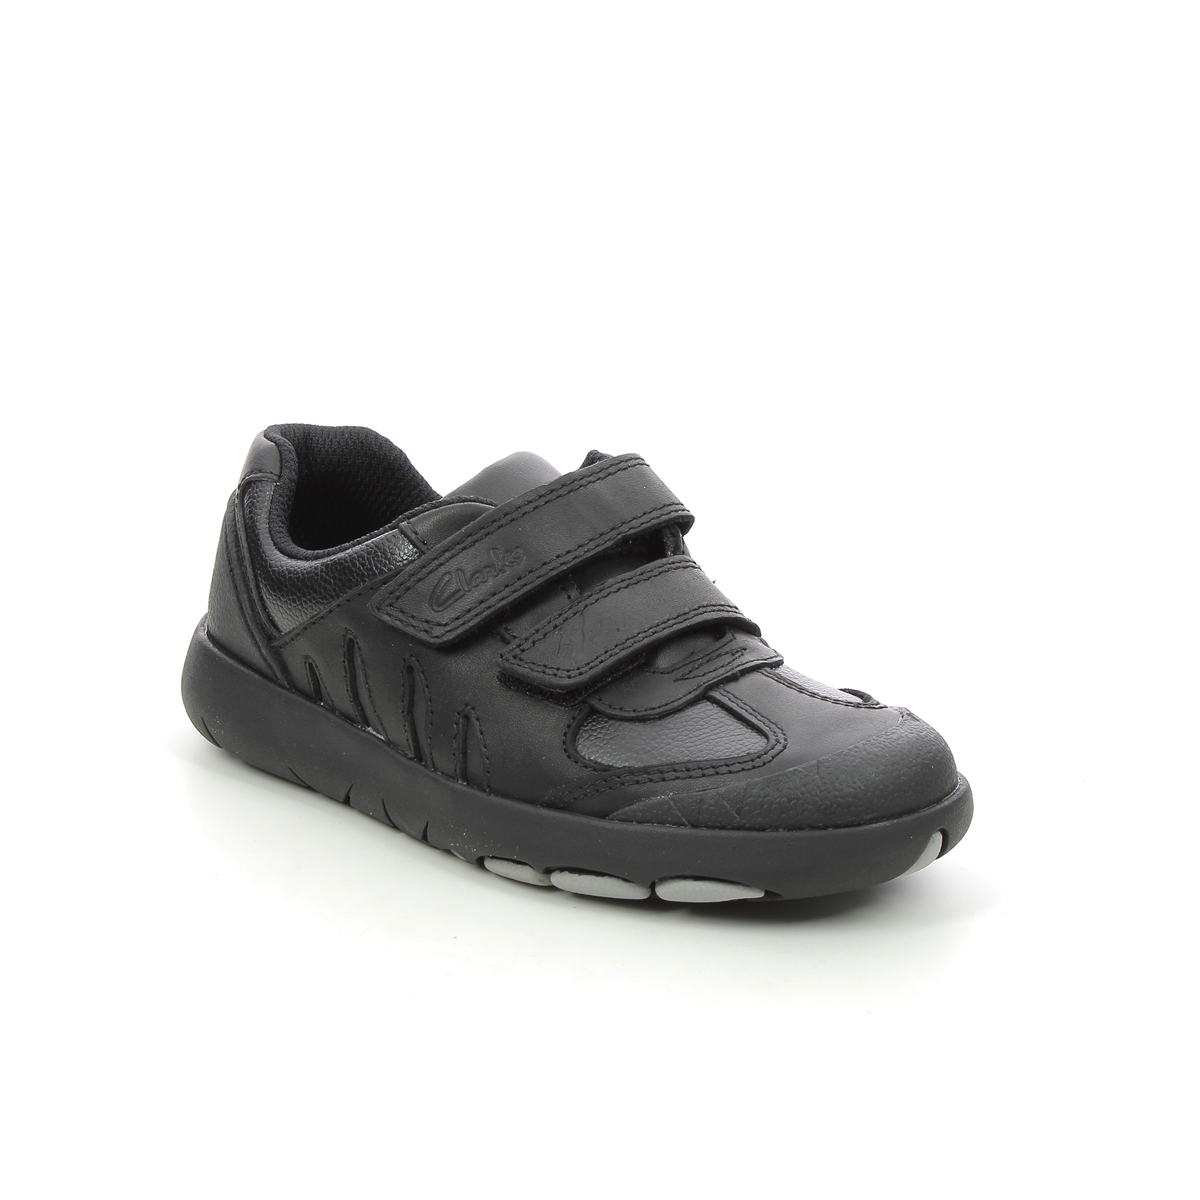 Clarks Rex Stride K Black leather Kids Boys Shoes 6269-86F in a Plain Leather in Size 2